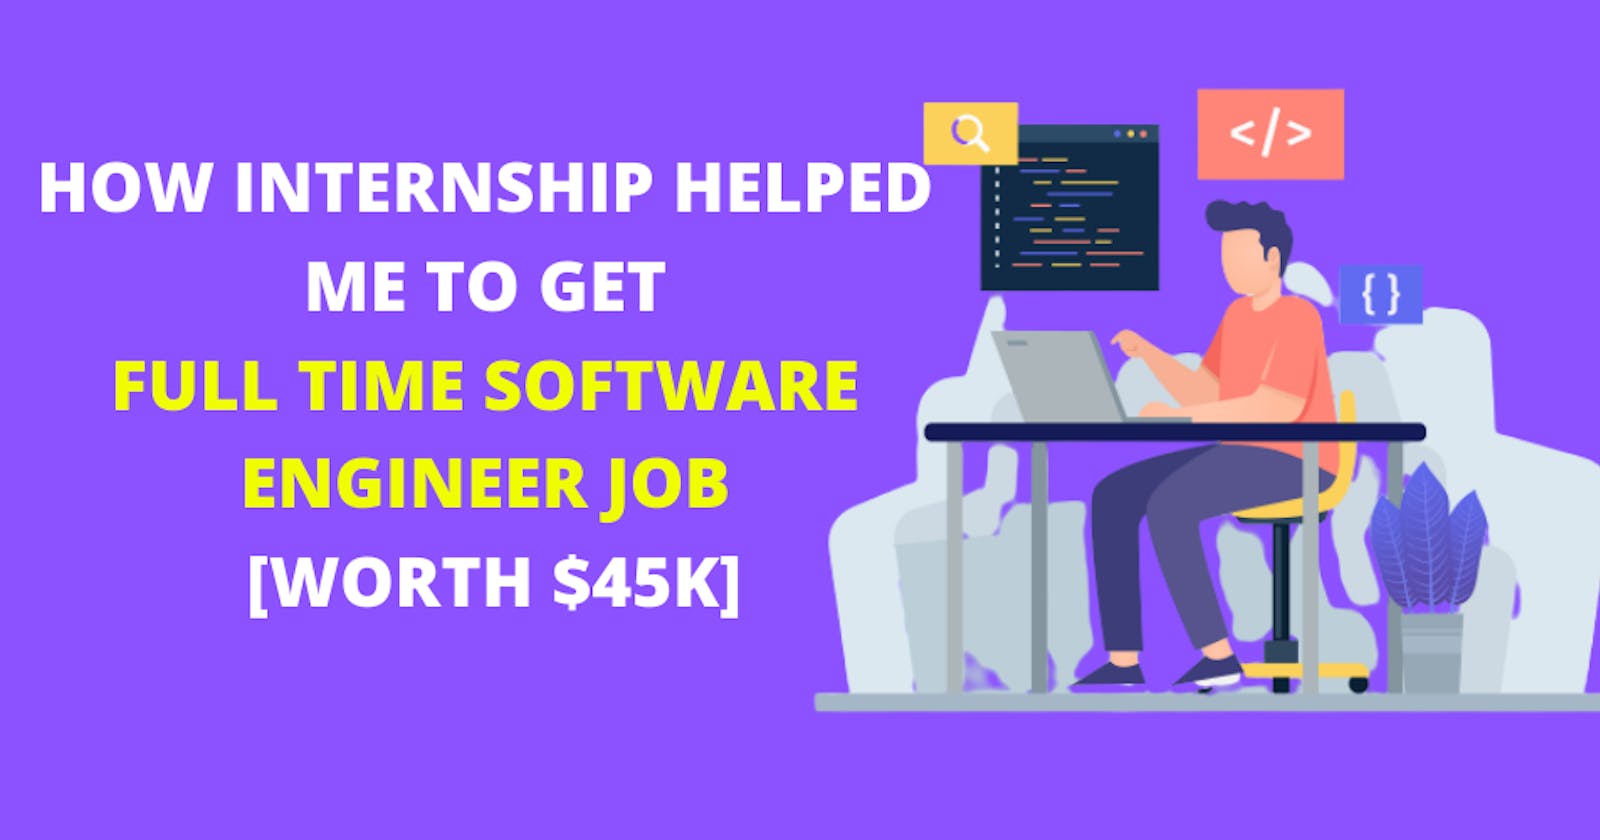 How Internship Helped Me To Get Full-Time Software Engineer Job (Worth $45k)